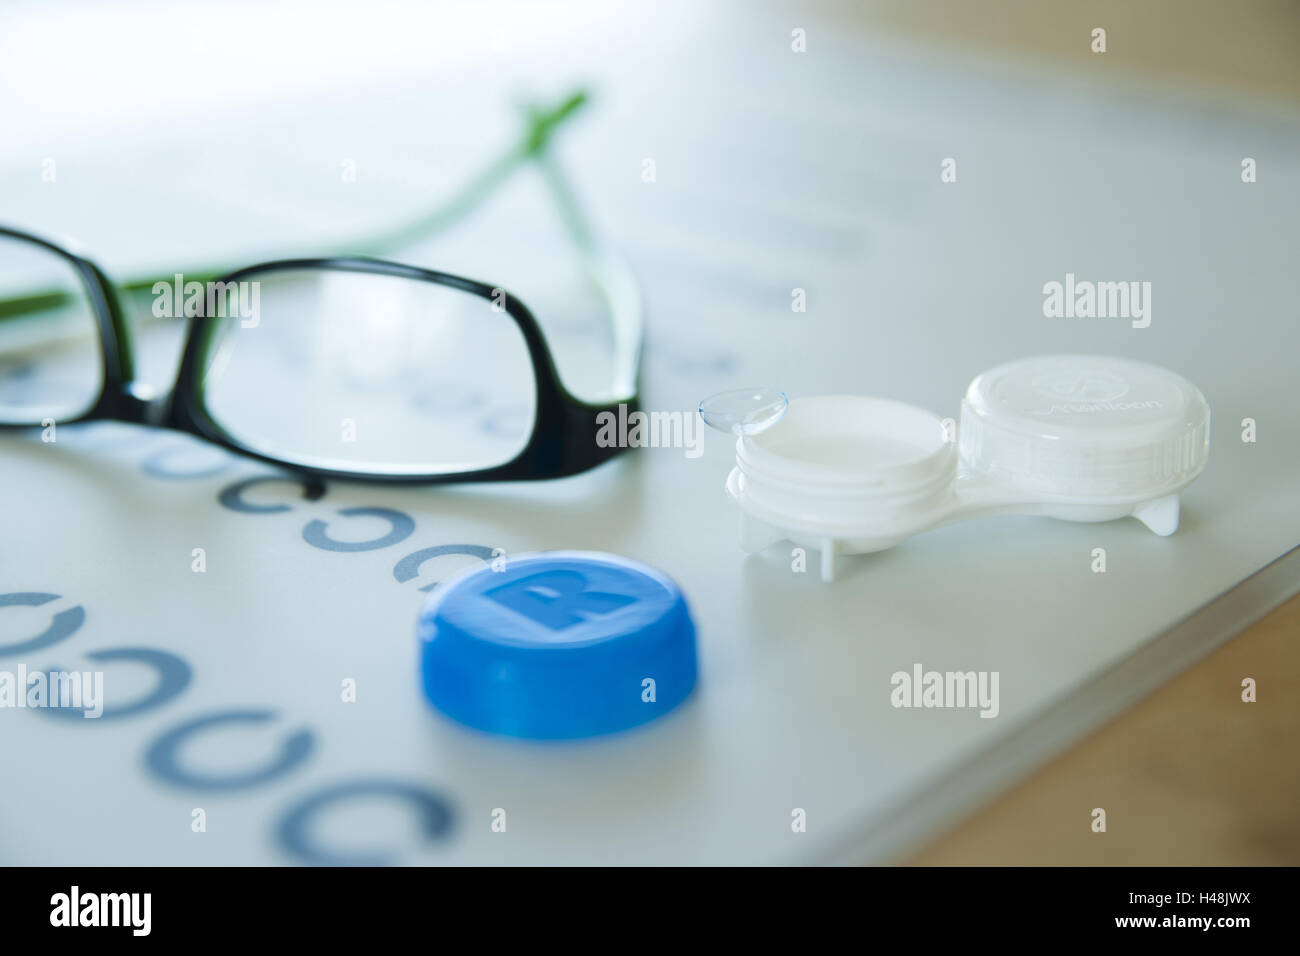 Contact lenses and glasses lie on a visual test, Stock Photo